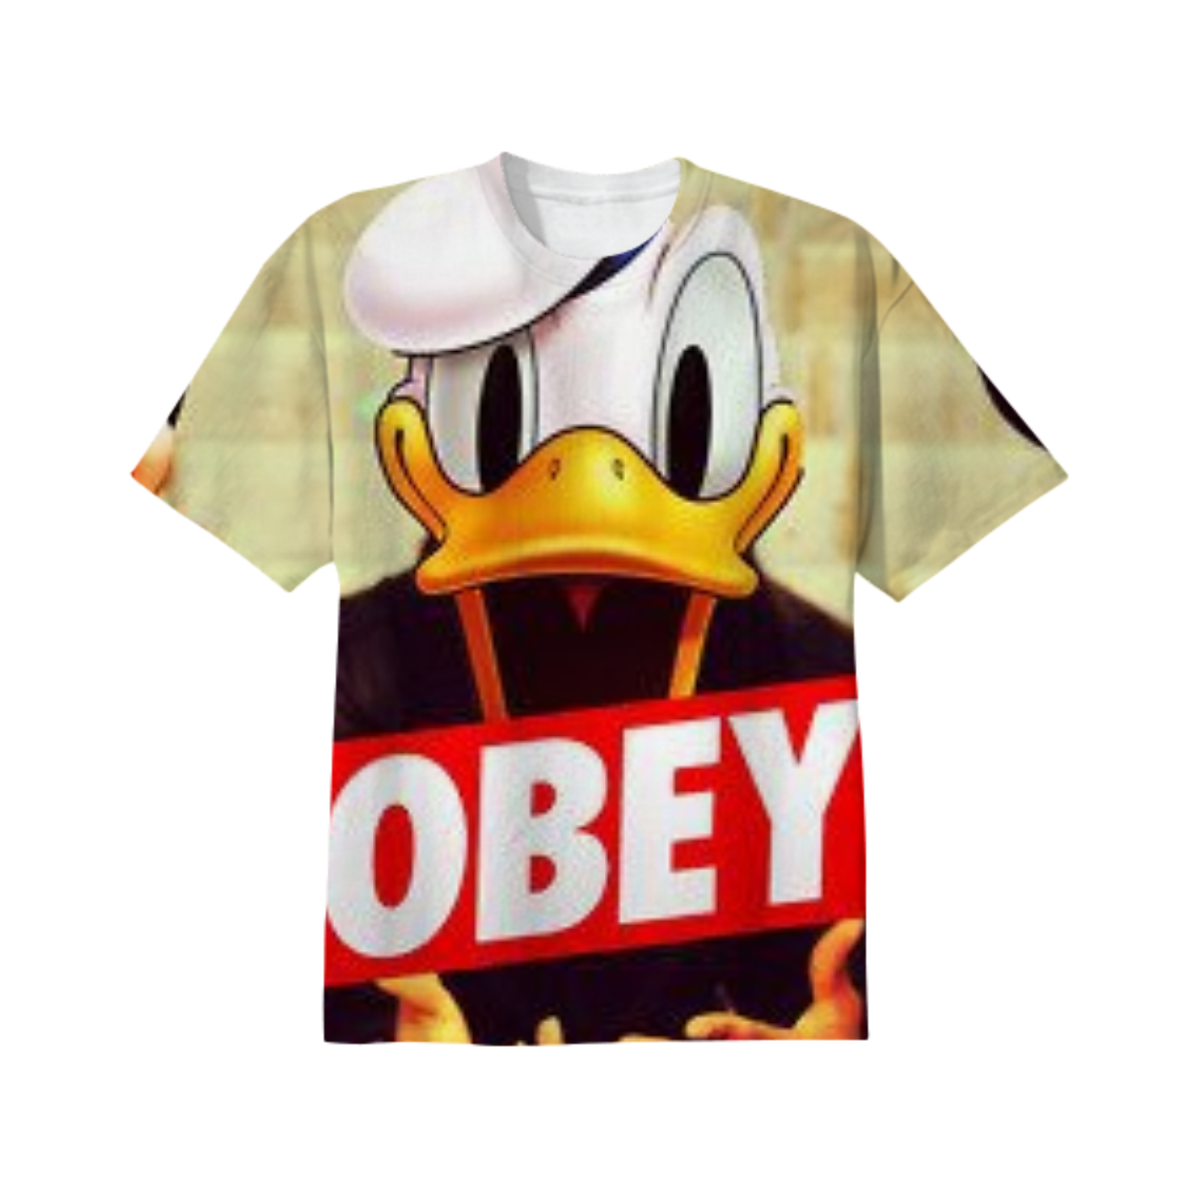 obey me official merchandise